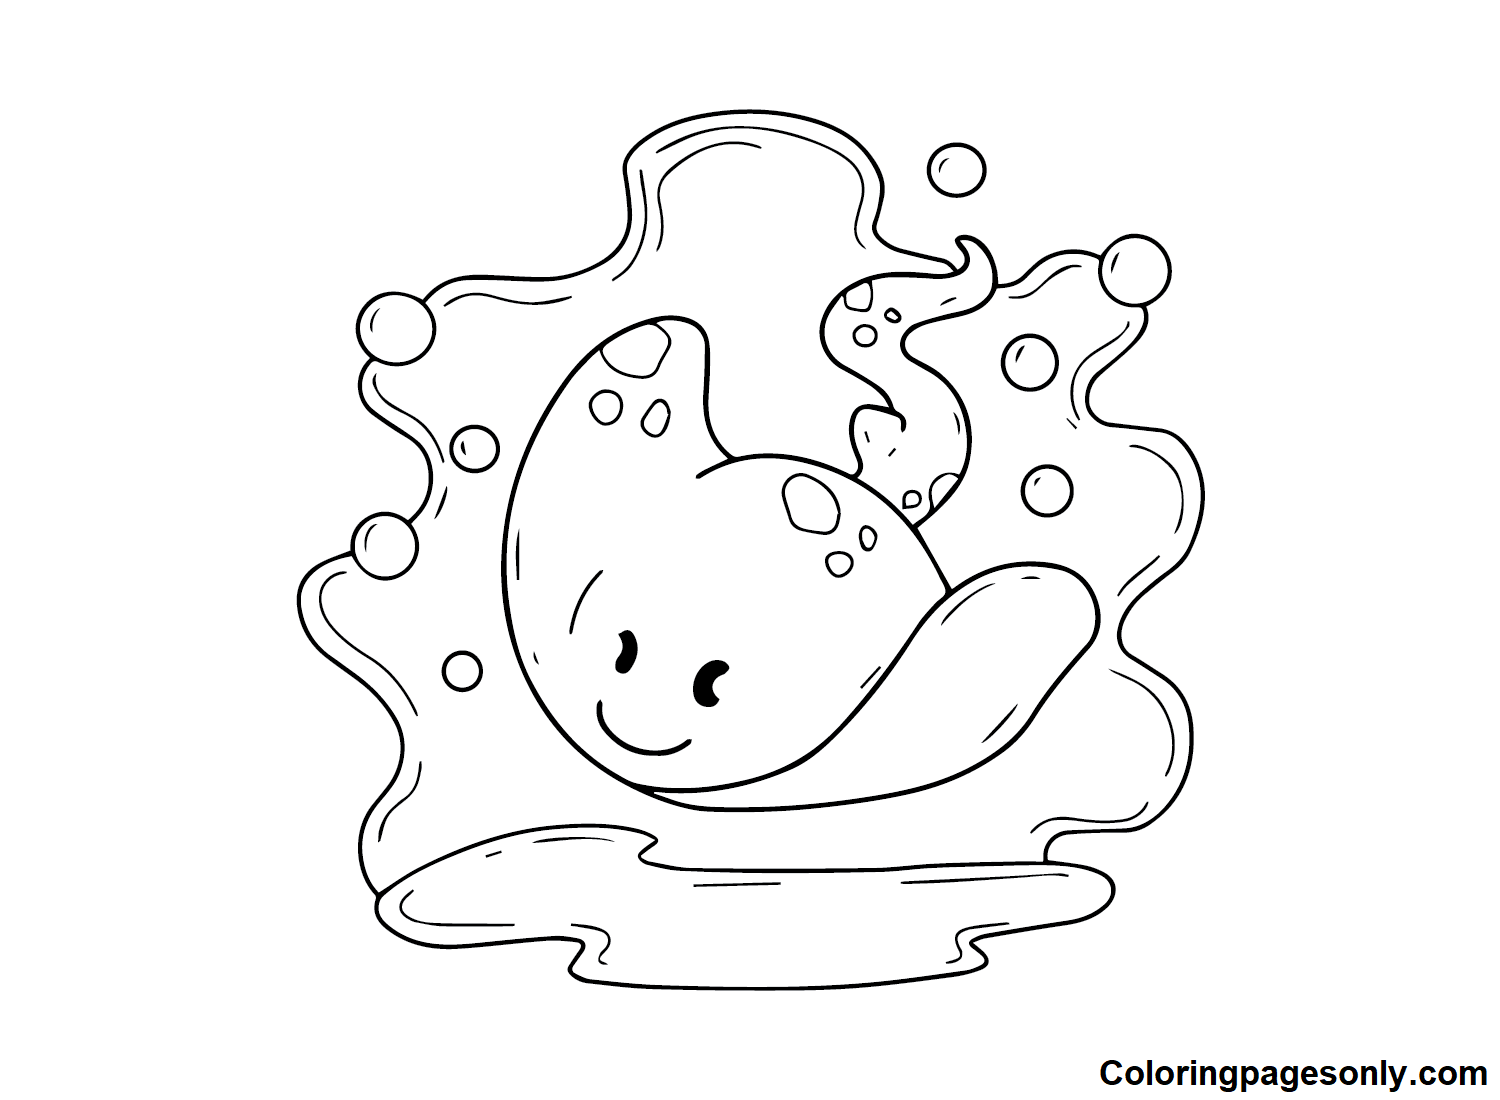 Adorable Stingray Coloring Page